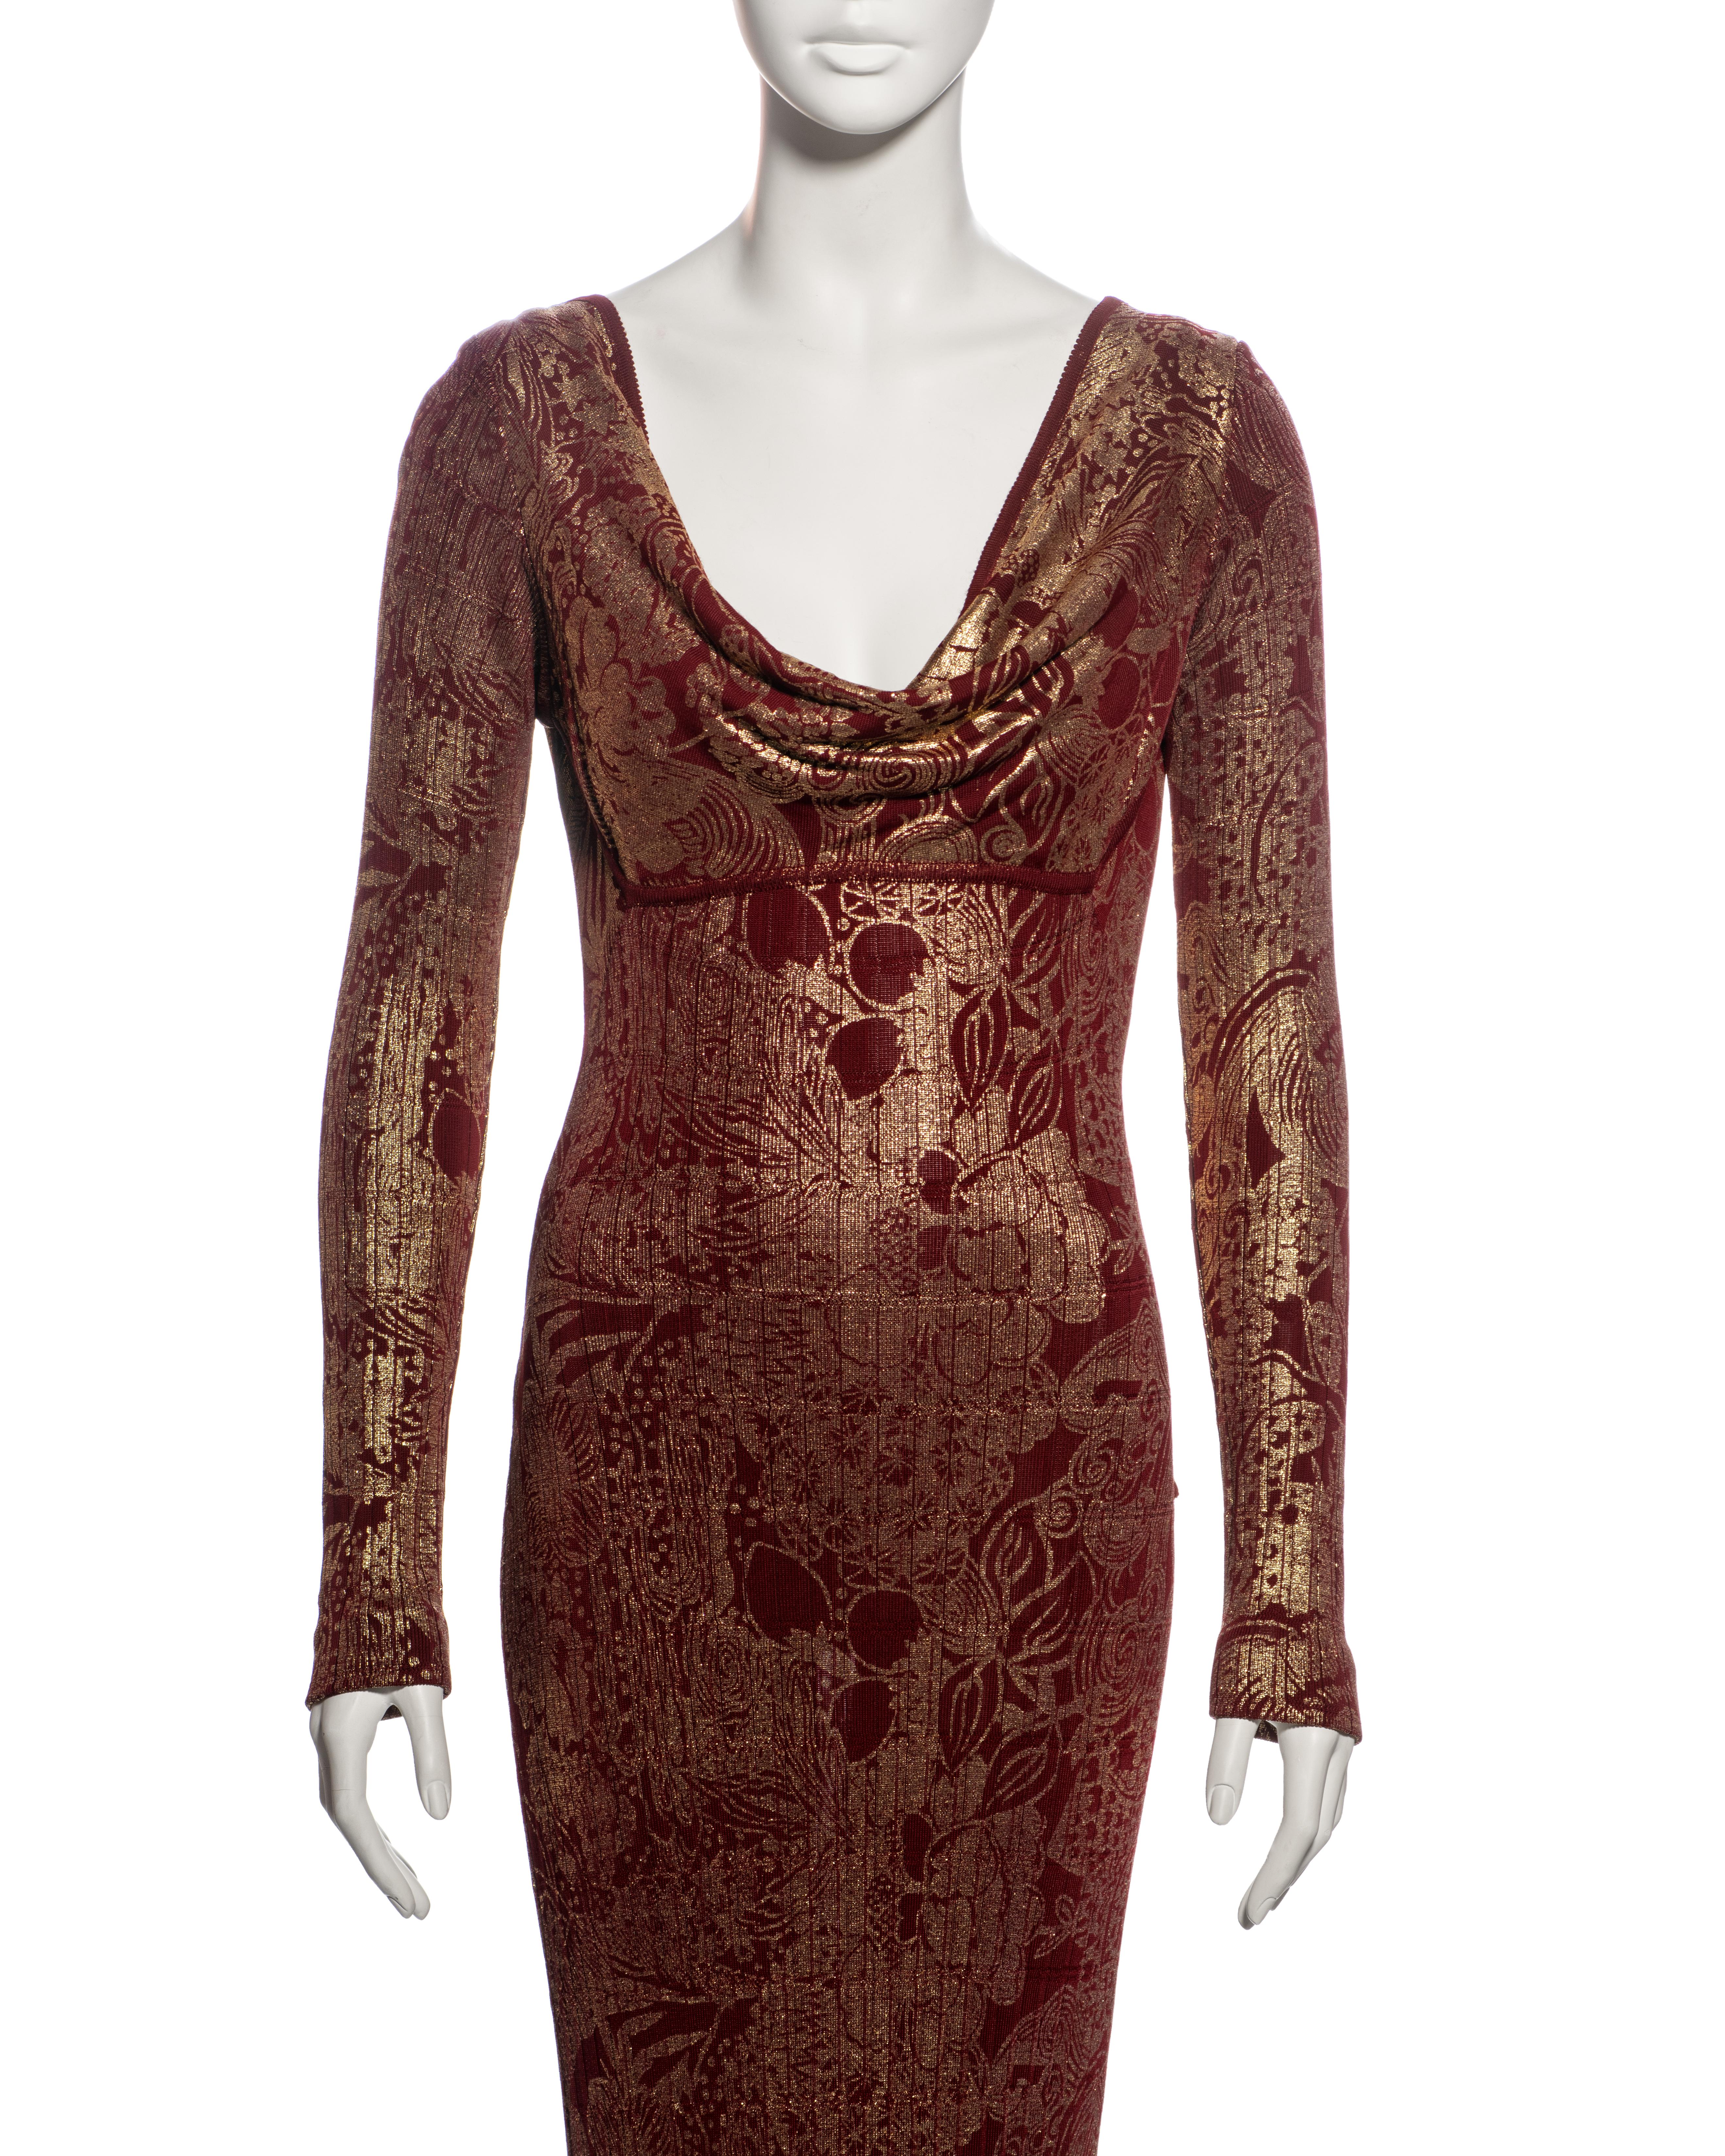 John Galliano Bordeaux Knit Evening Dress with Gold Foil Floral Print, fw 1998 In Excellent Condition For Sale In London, GB